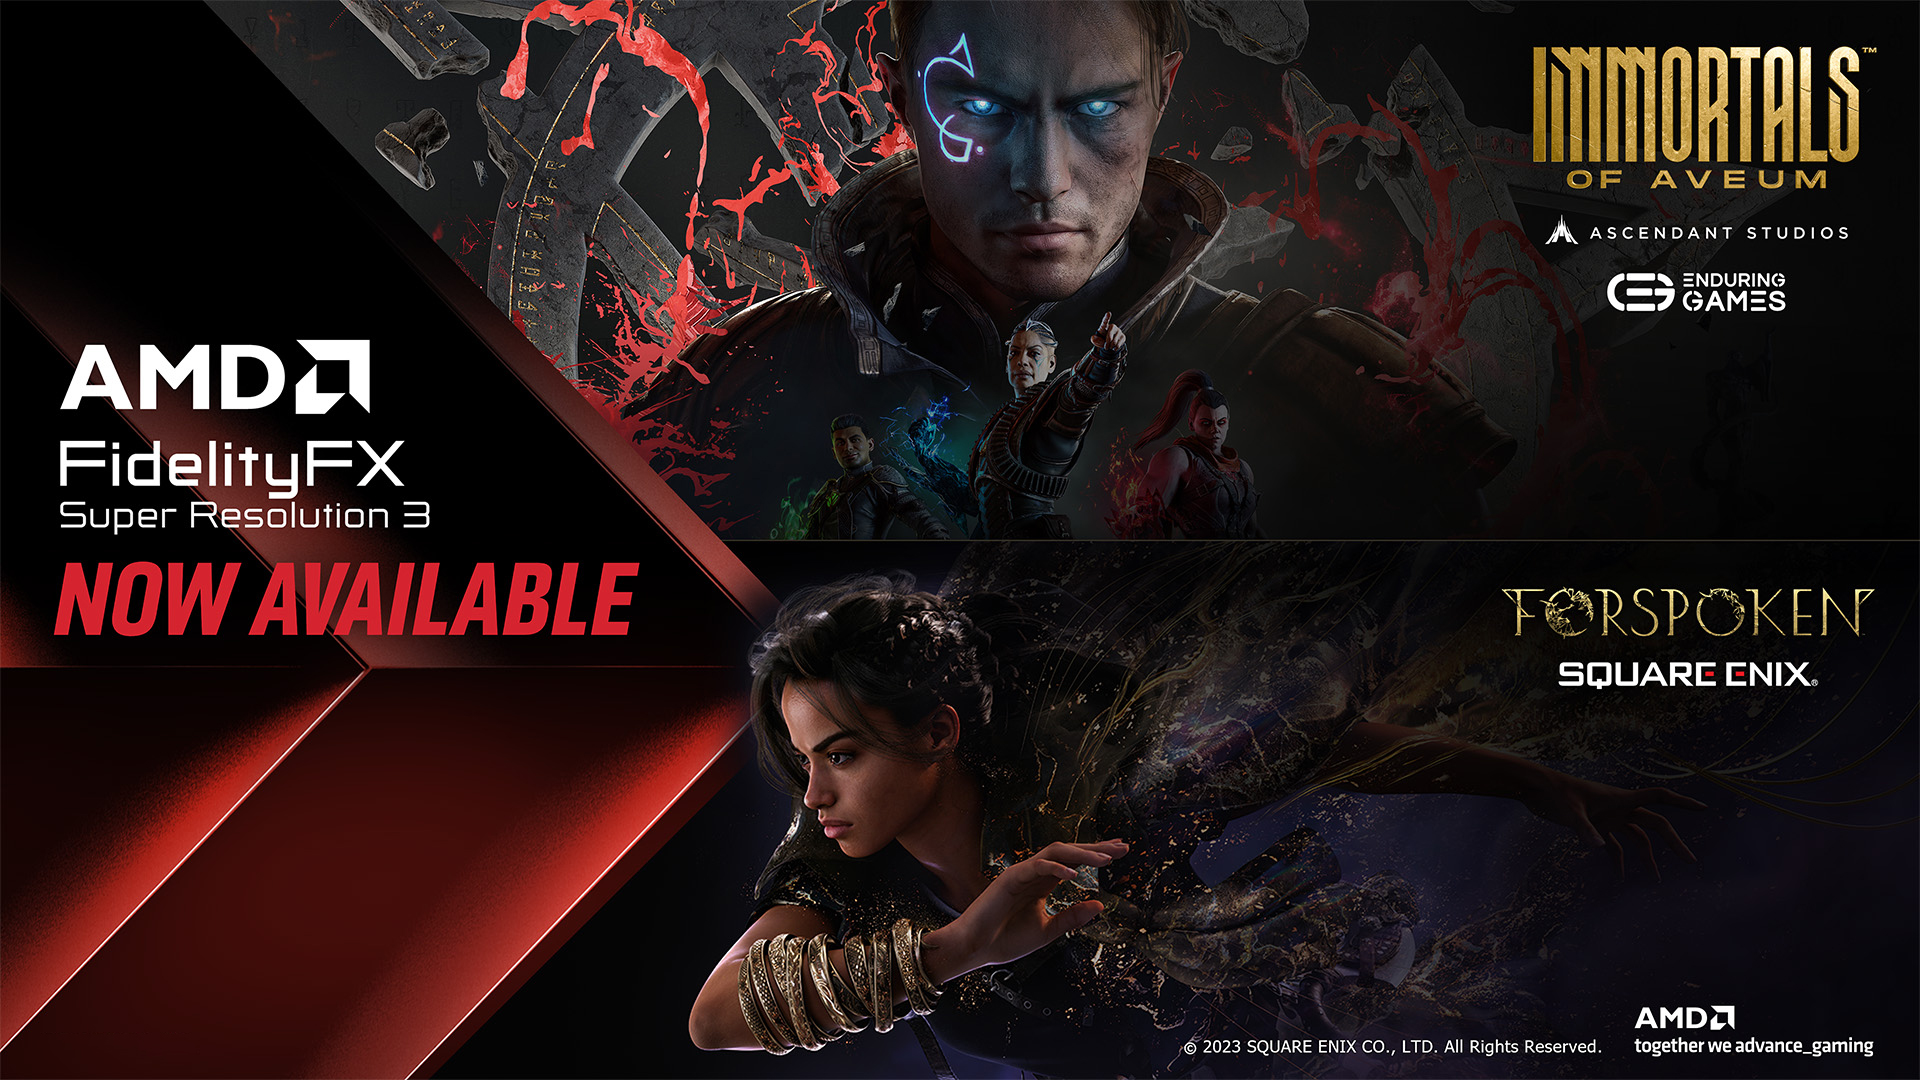 AMD released FidelityFX Super Resolution 3 in Forspoken and Immortals of Aveum games